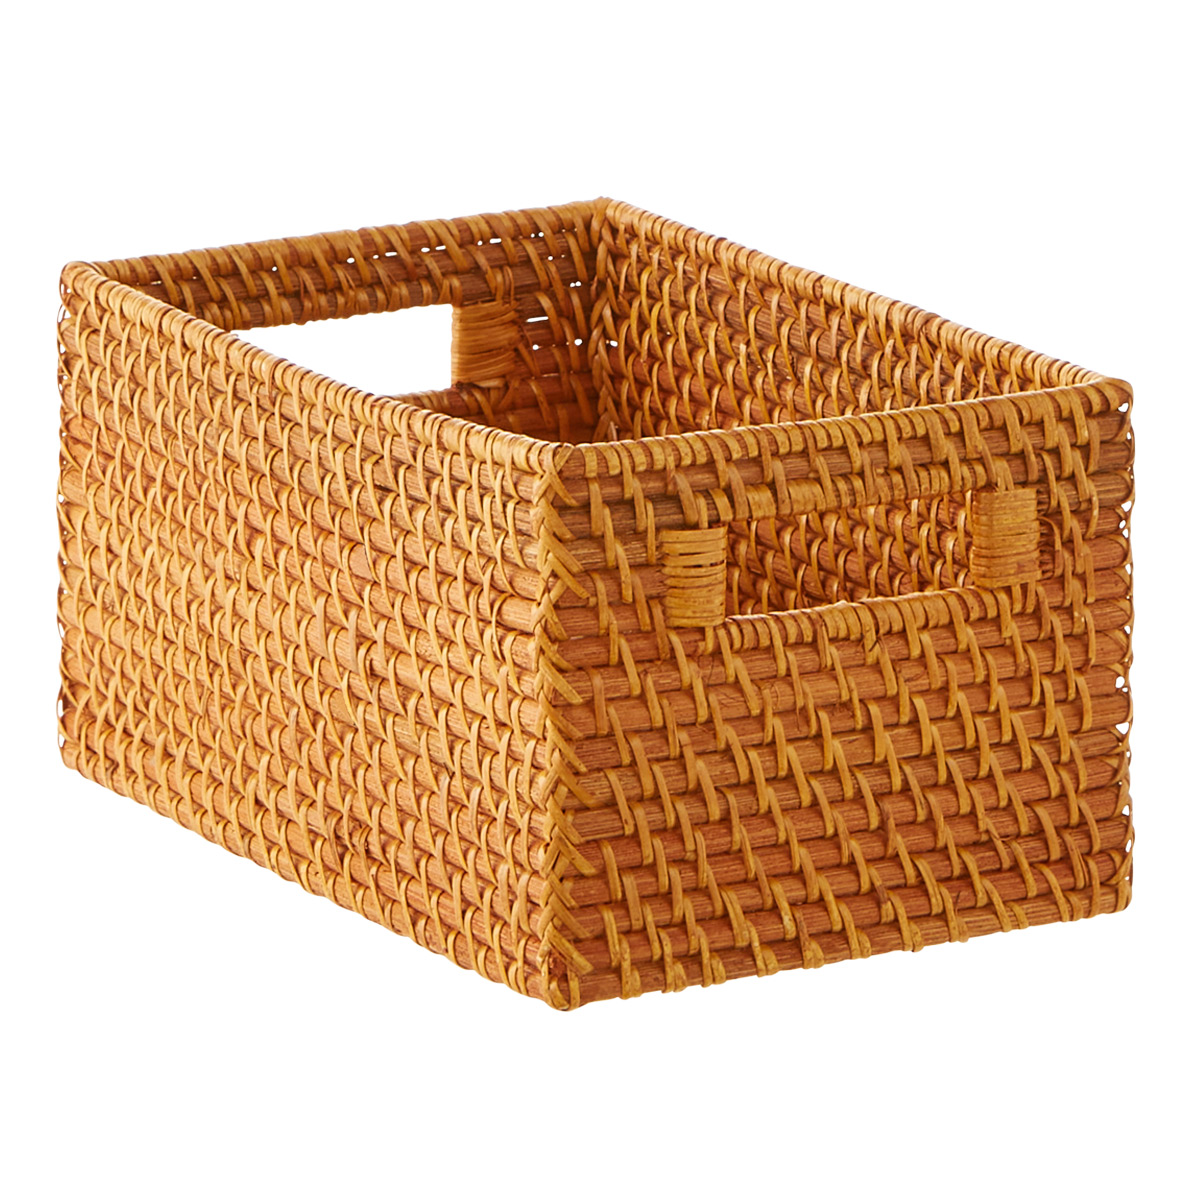 https://www.containerstore.com/catalogimages/420597/10077167_small_rattan_bin_with_handl.jpg